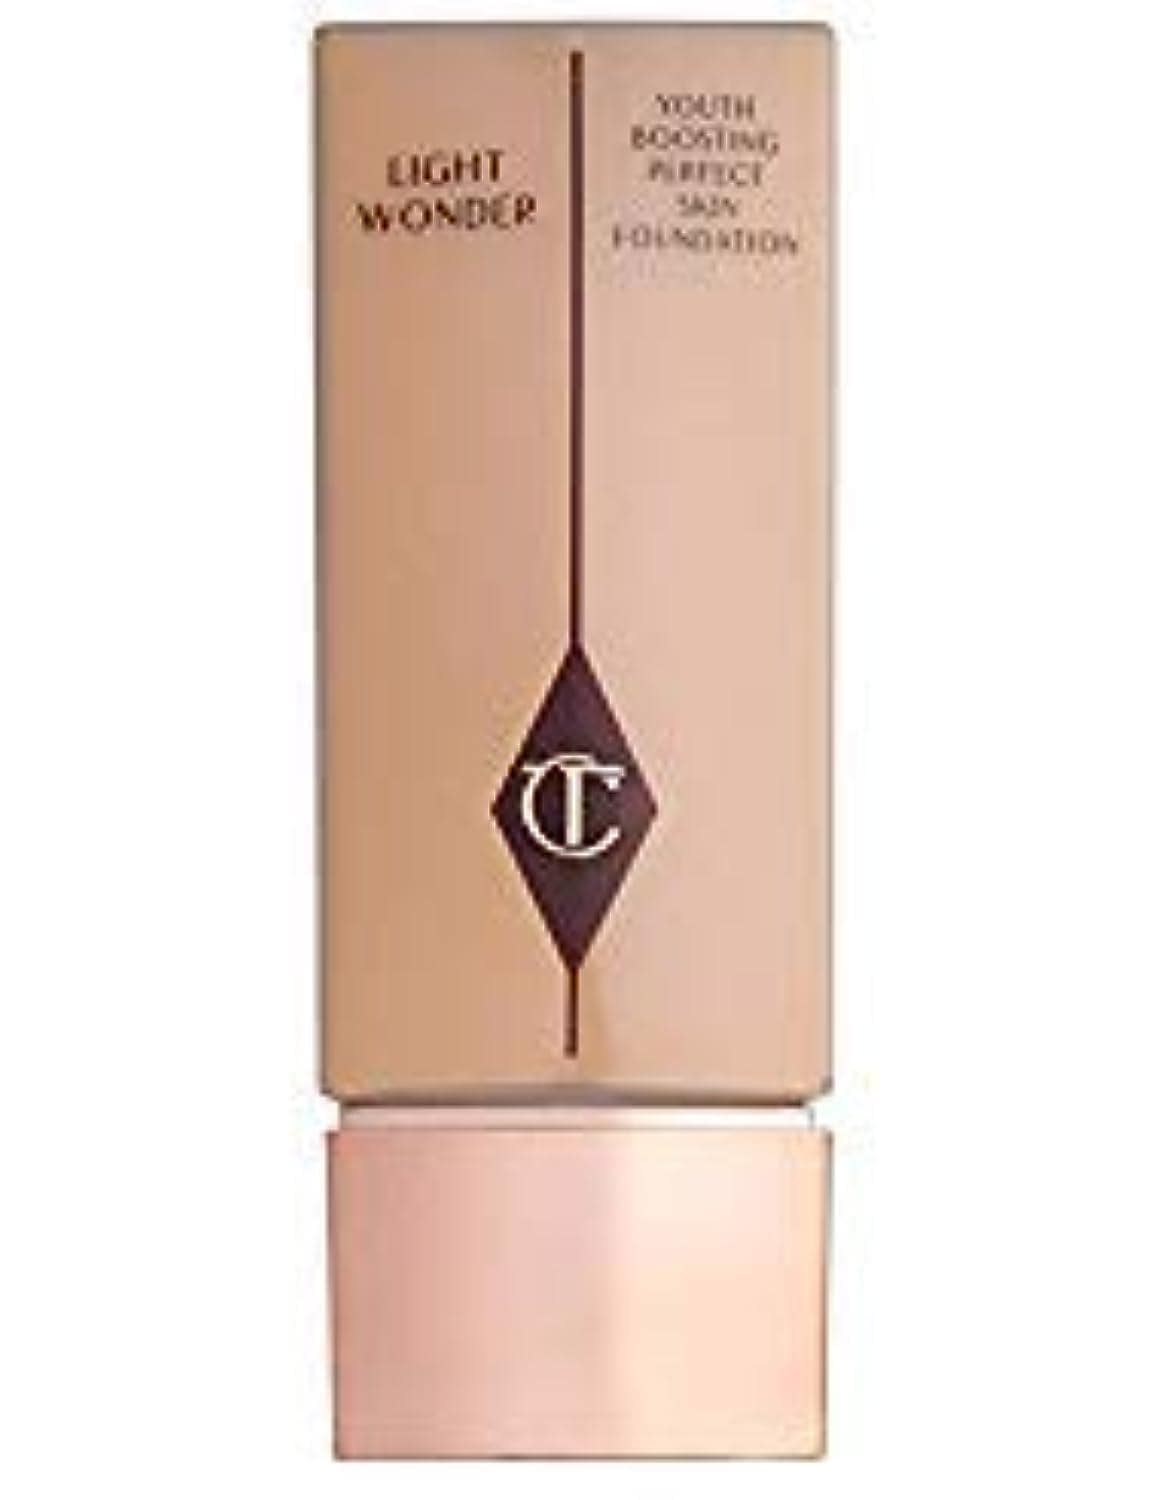 Charlotte Tilbury's Light Wonder Foundation shade offers weightless, sheer coverage with an adaptable shade range, though a higher SPF and expanded shade options would enhance its appeal.